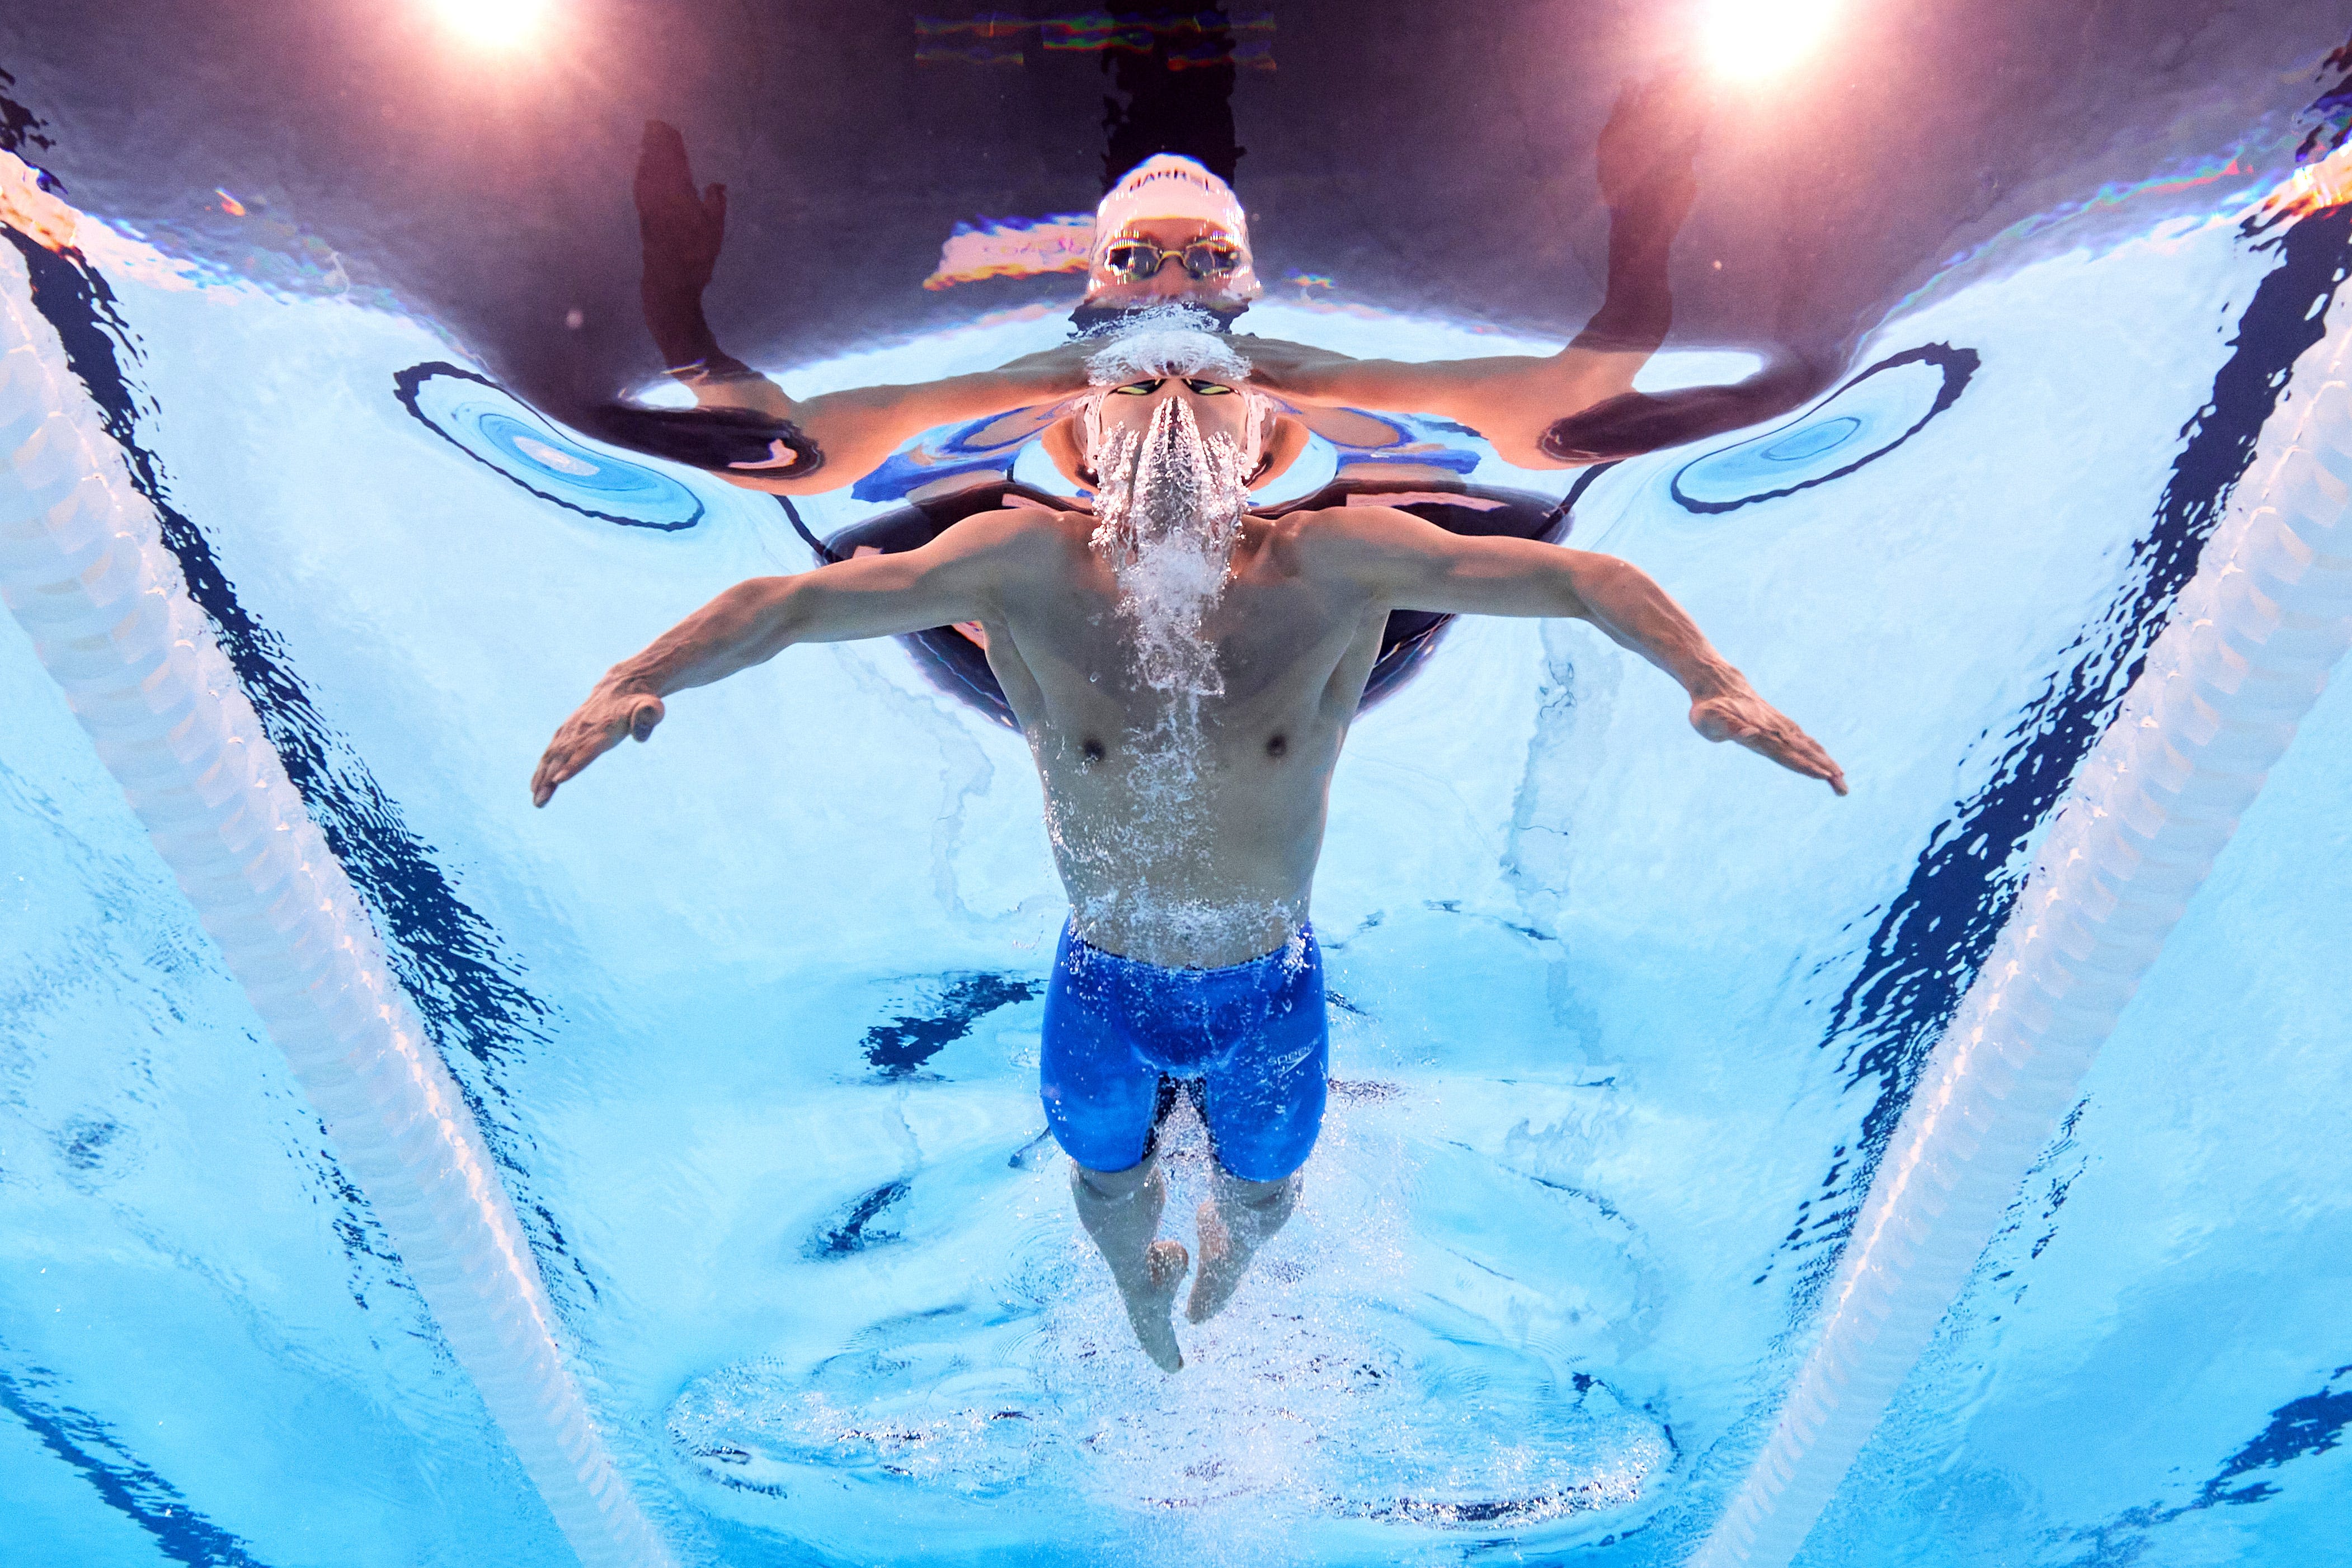 Incredible underwater images from the 2024 Paris Olympics swimming events